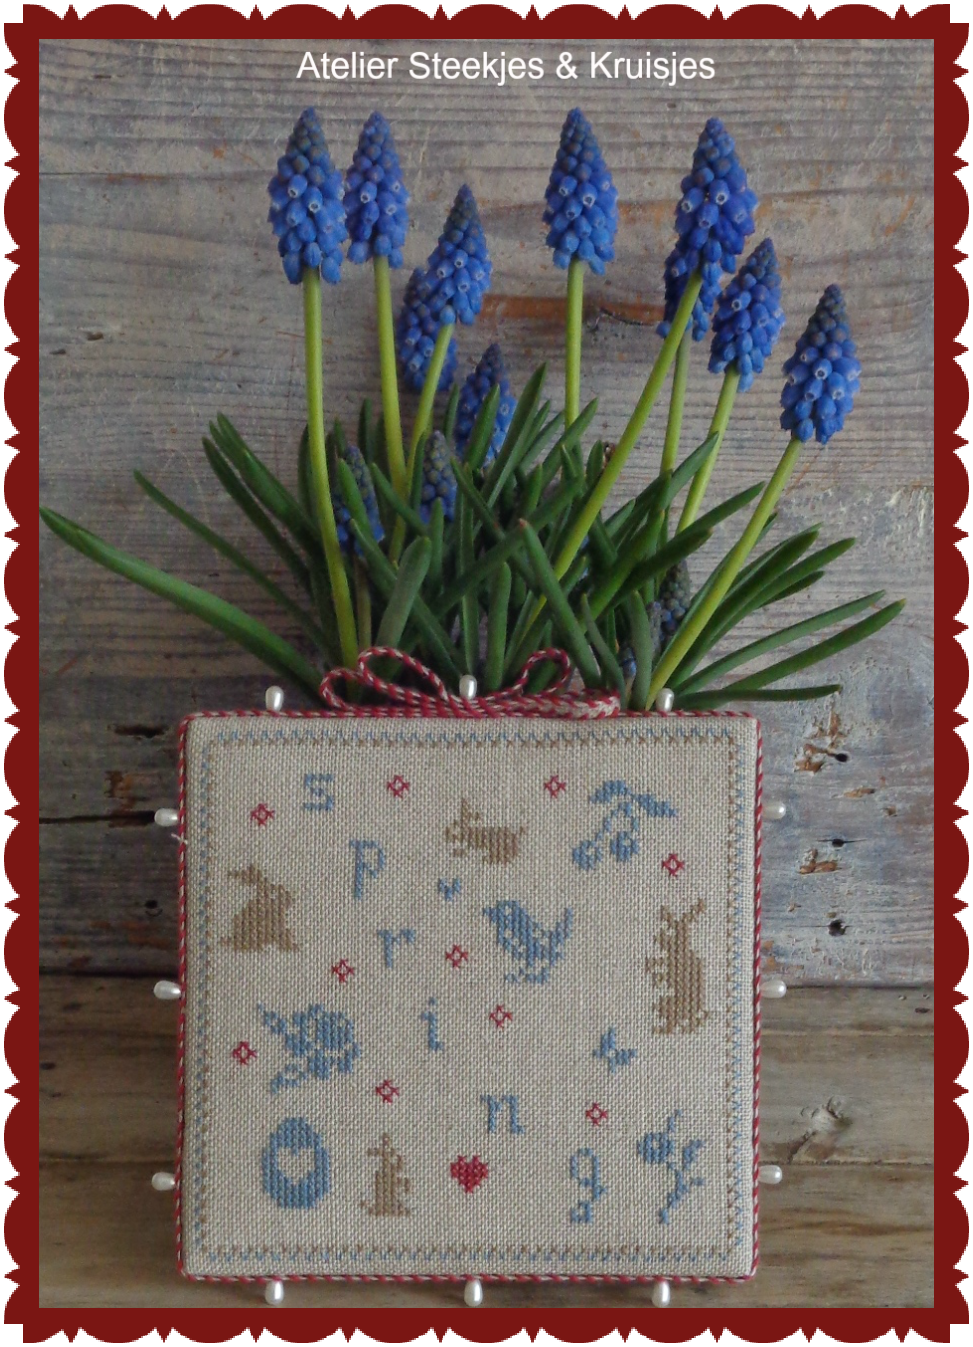 S&K "Spring" Pattern or Packet